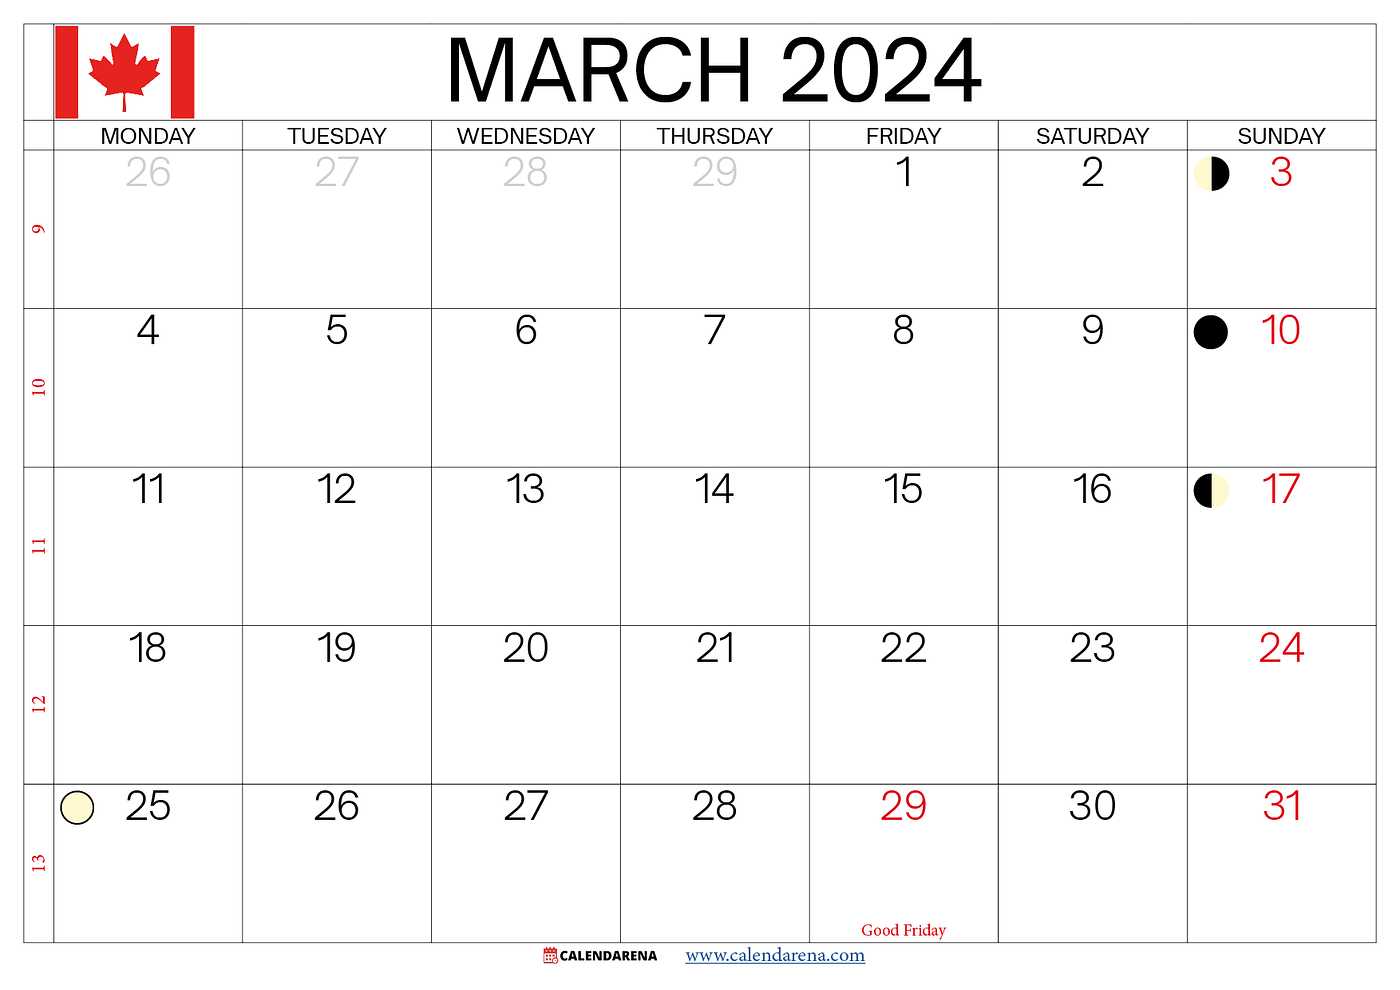 March 2024 Calendar Canada With Holidays |Calendarena | Medium intended for Free Printable Calendar 2024 By Month Canada